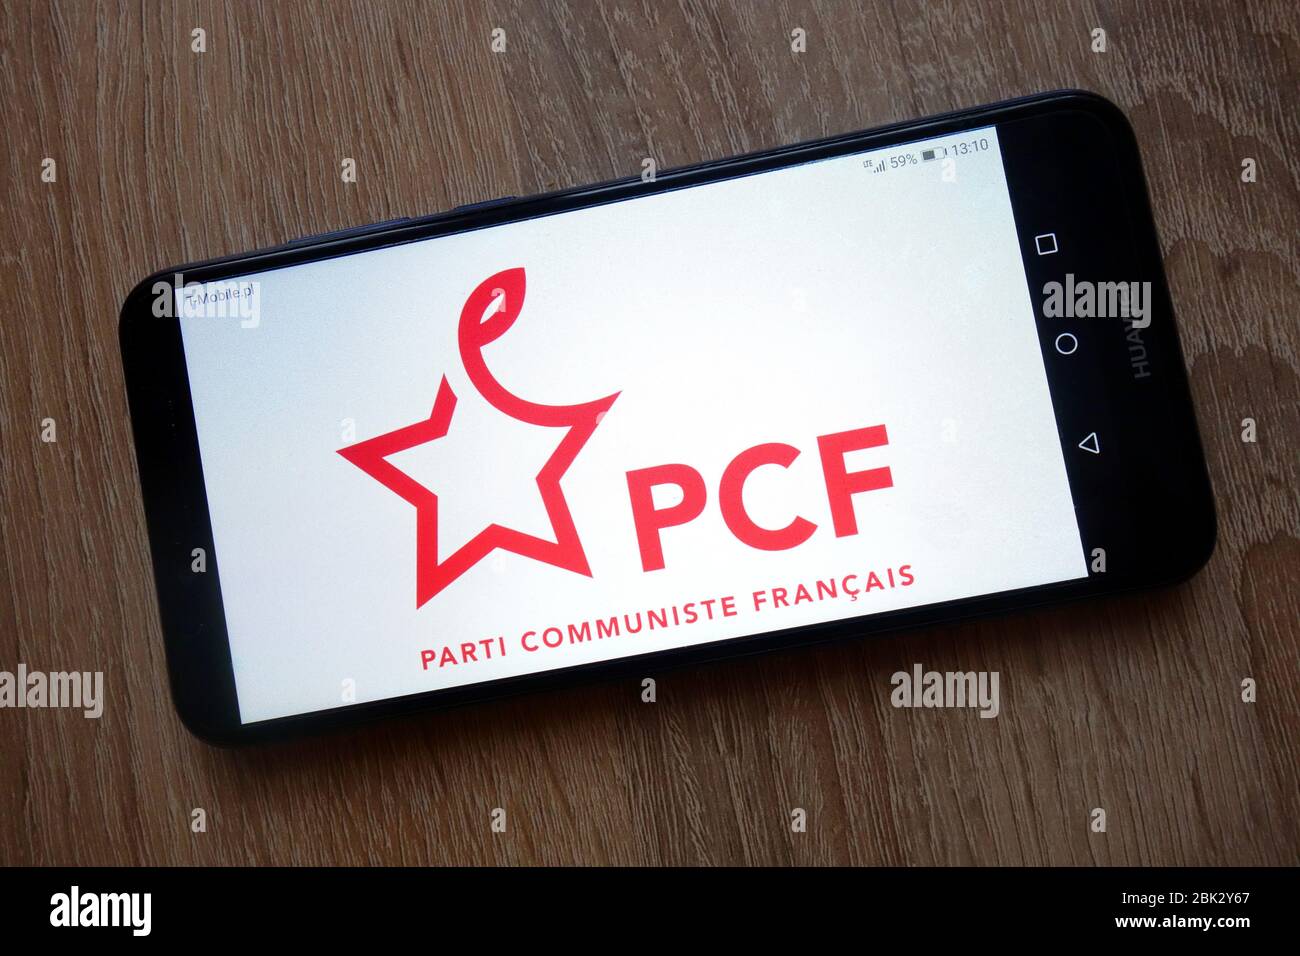 PCF (Parti Communiste Francais) French political party logo displayed on smartphone Stock Photo